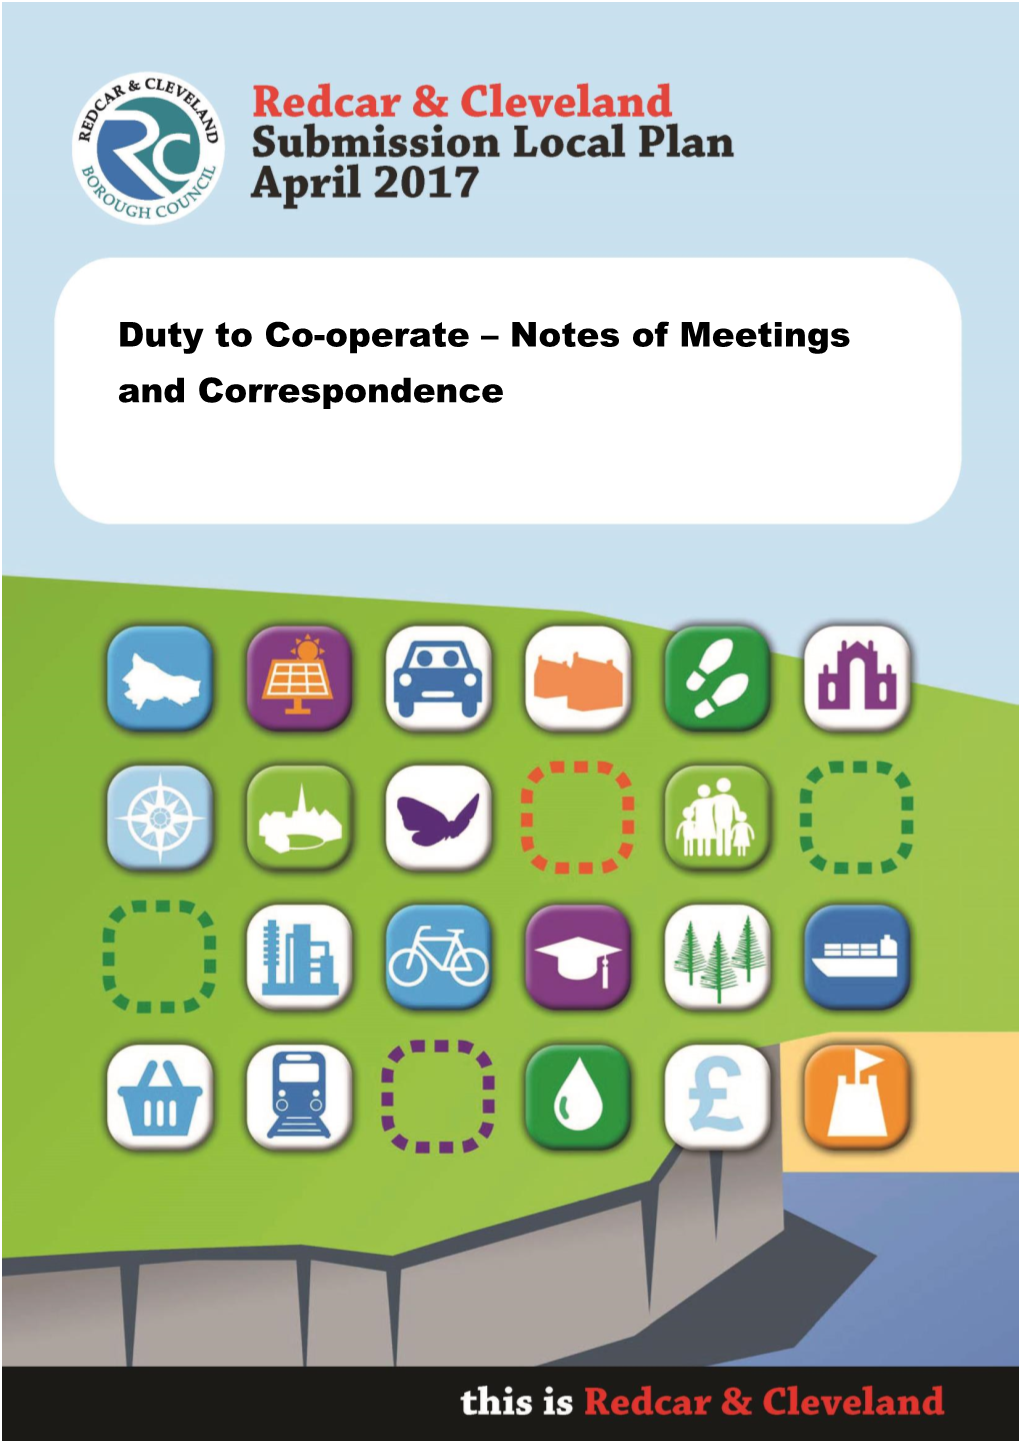 Duty to Co-Operate – Notes of Meetings and Correspondence